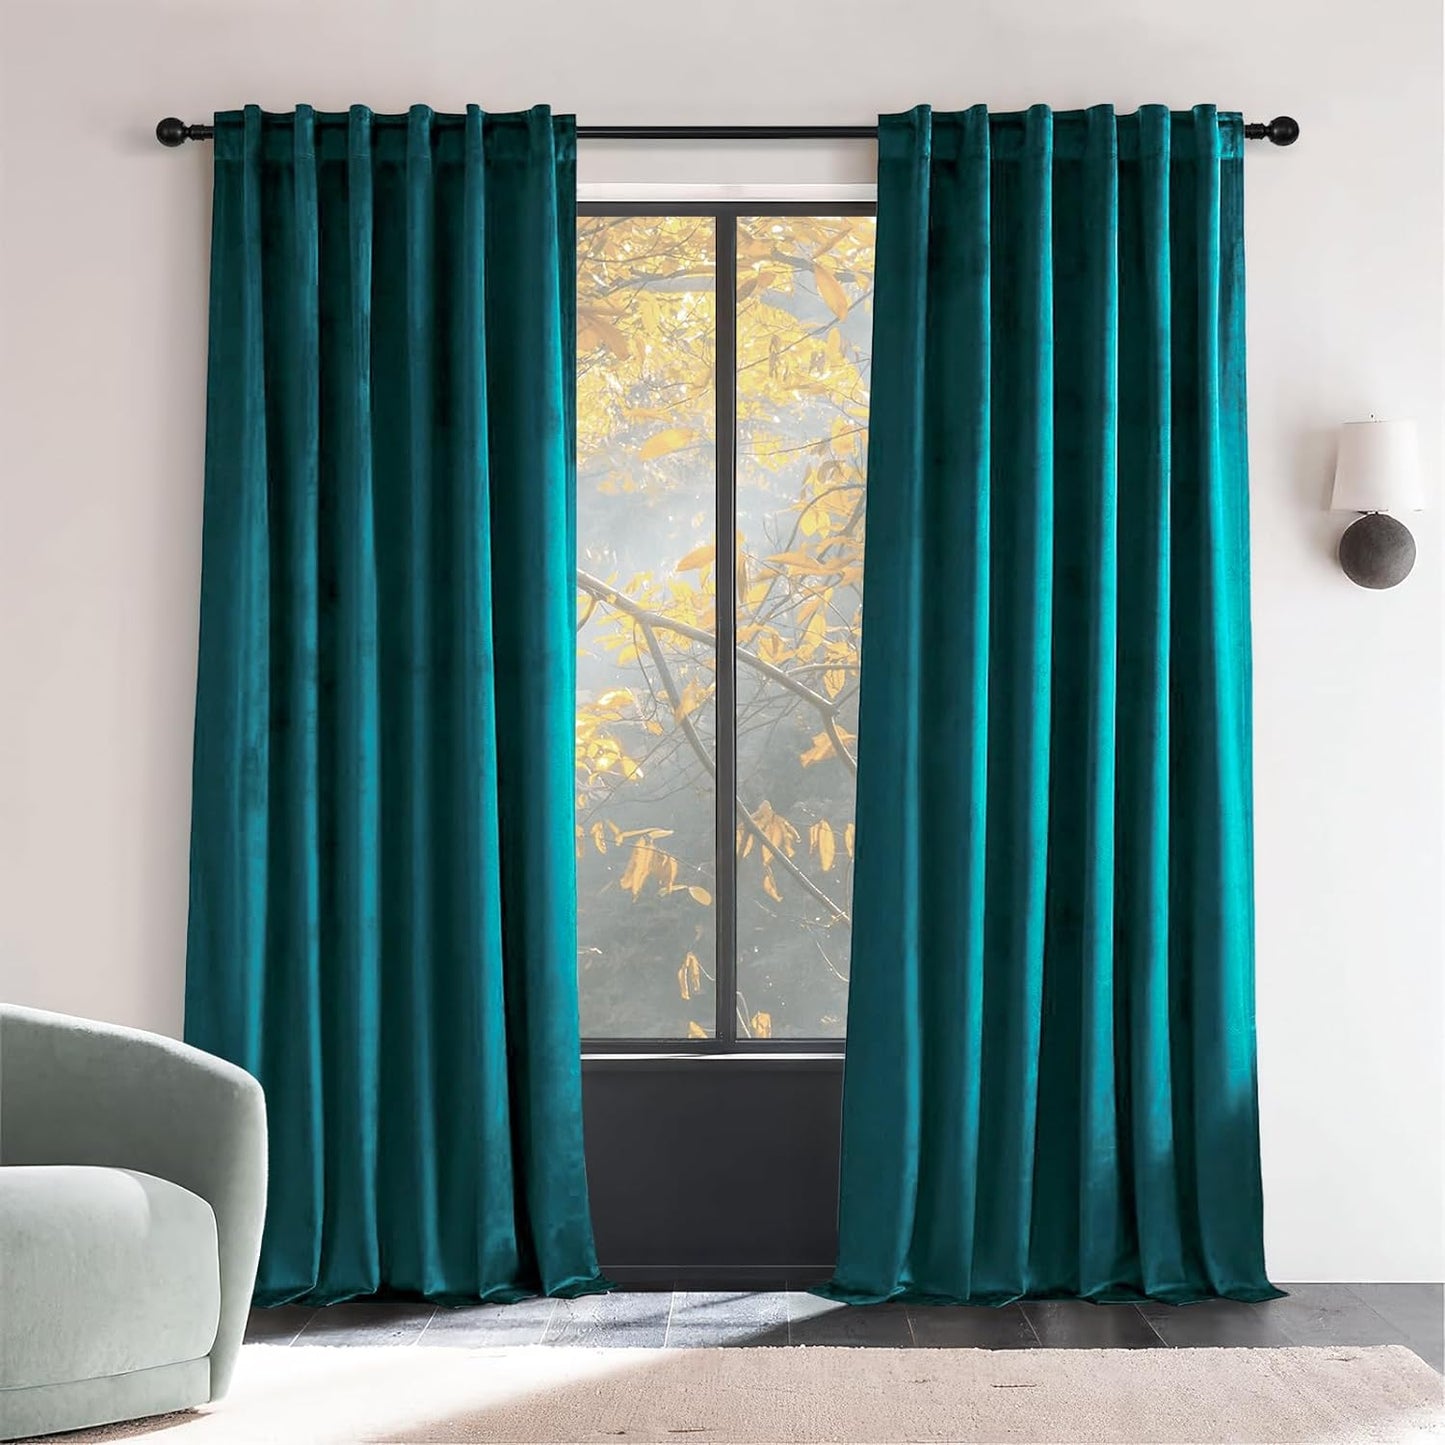 Topfinel Olive Green Velvet Curtains 84 Inches Long for Living Room,Blackout Thermal Insulated Curtains for Bedroom,Back Tab Modern Window Treatment for Living Room,52X84 Inch Length,Olive Green  Top Fine Teal Green 52" X 96" 